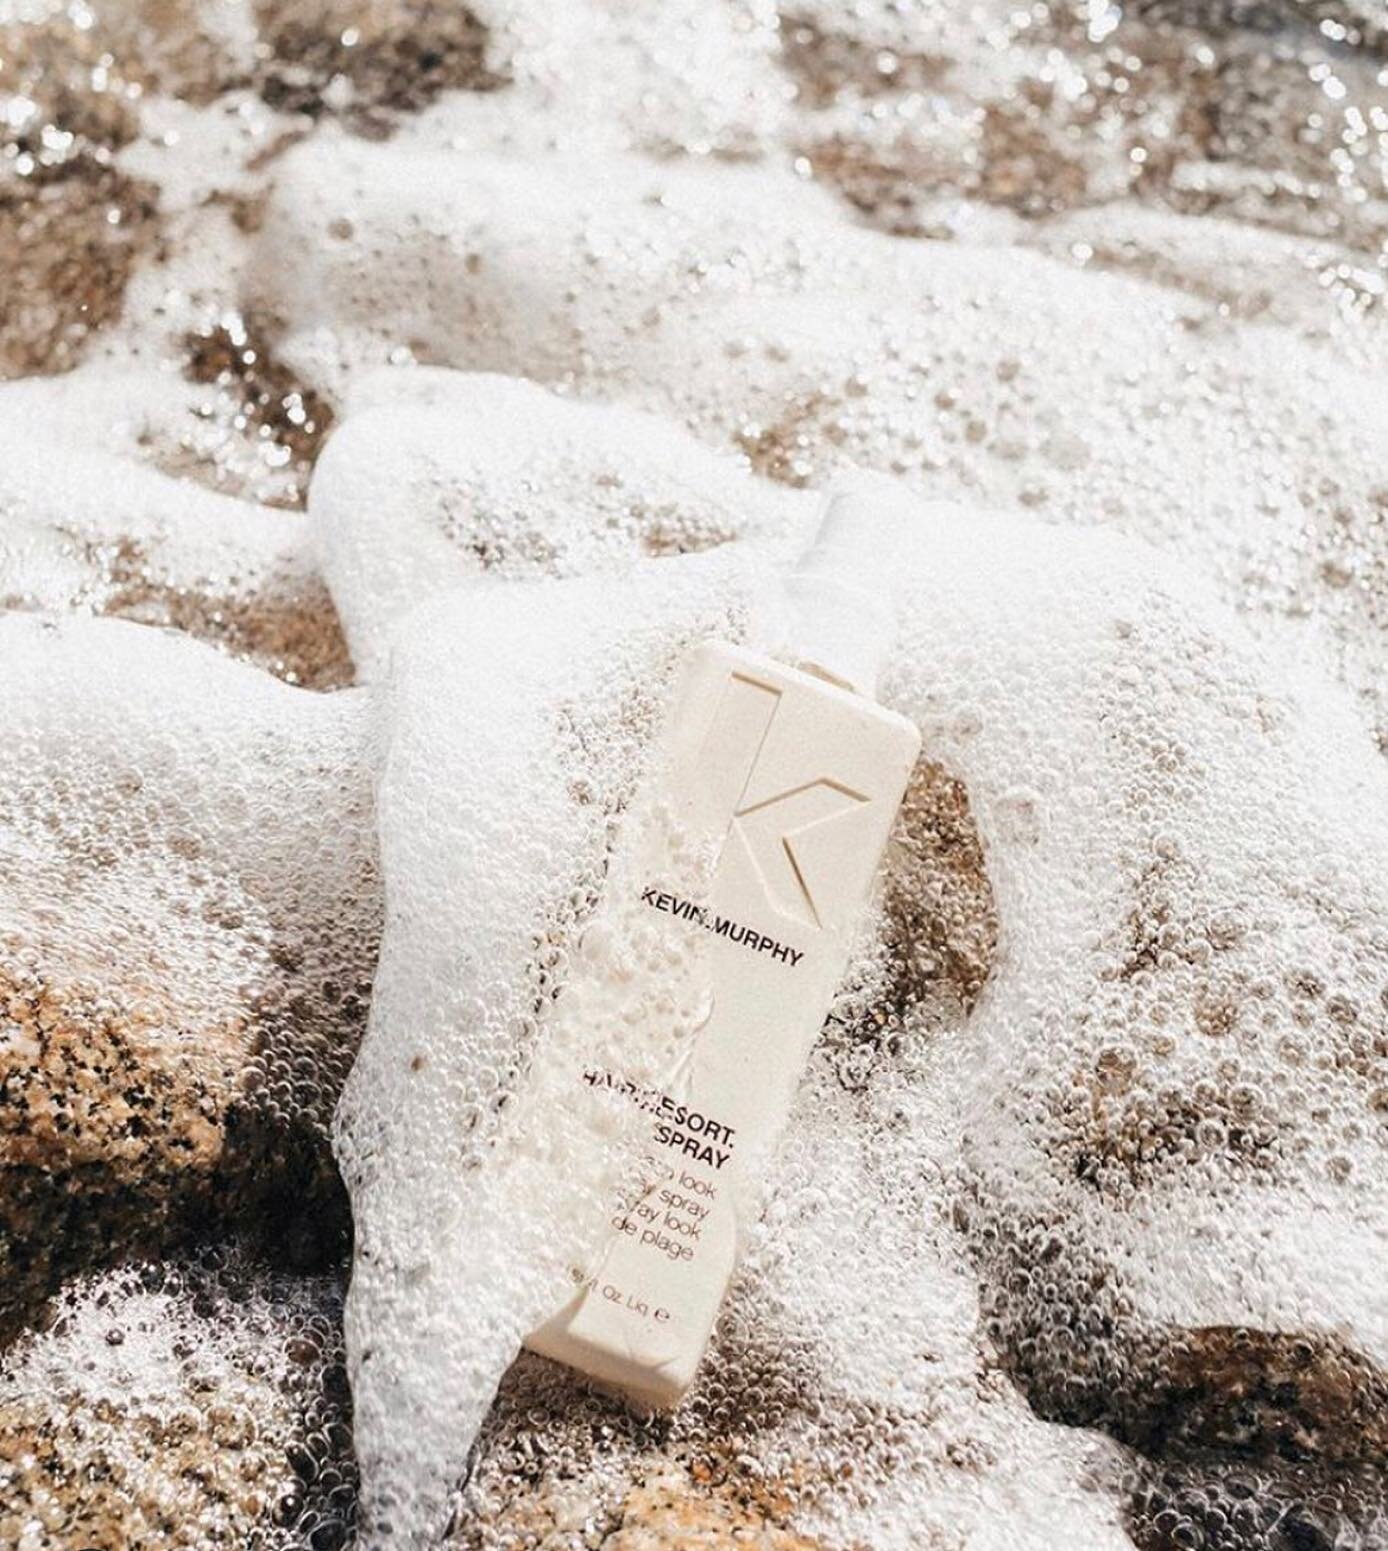 Surf&rsquo;s up&hellip; so treat your hair to a day at the beach with HAIR.RESORT.SPRAY, our super-cool hair spray that will help you recreate the iconic sexy, beach hair Kevin Murphy is renowned for. Refreshing bursts of citrus oils help you rock th